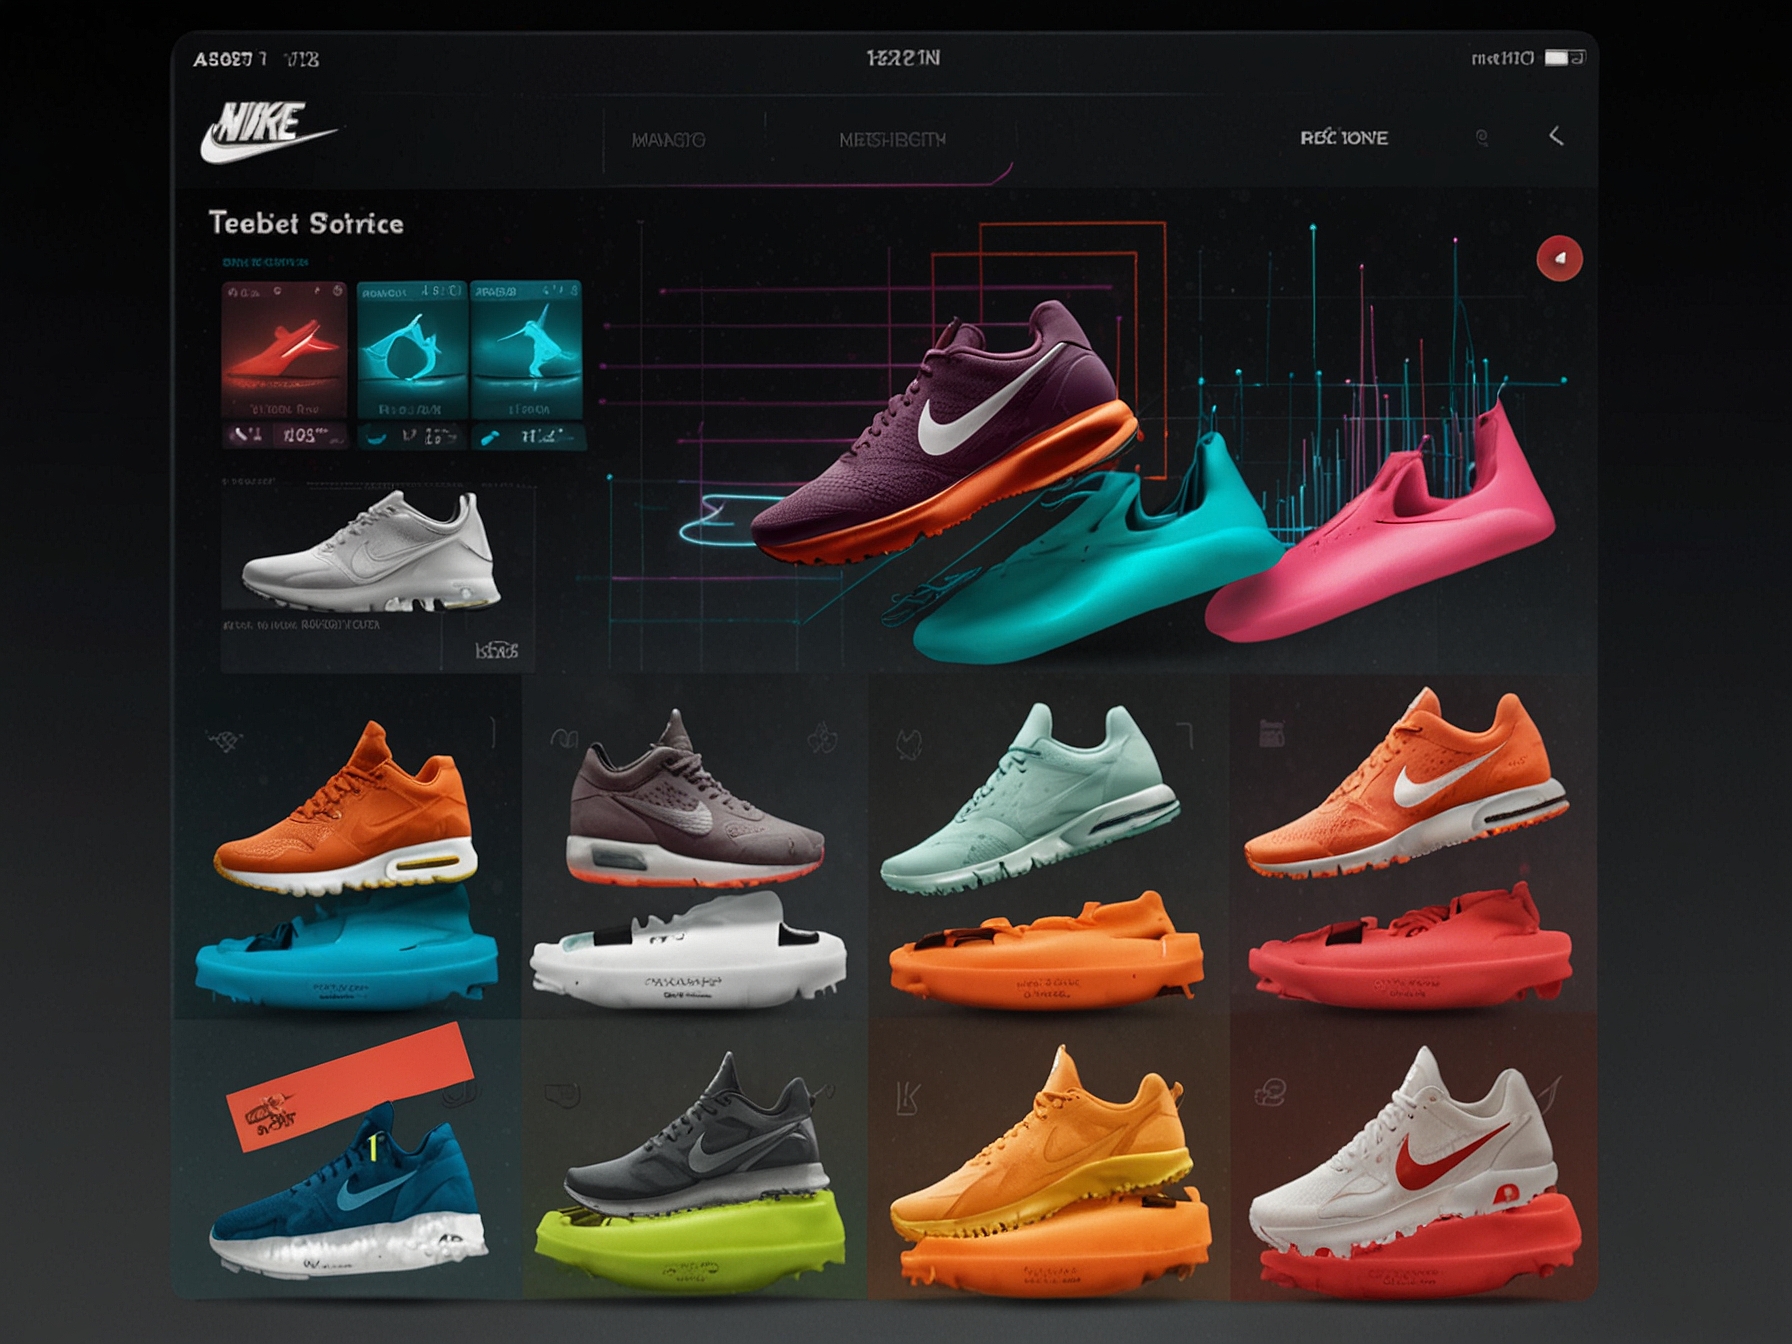 A composite image of Nike's tech-driven strategy, featuring digital sales platforms, personalized customer experiences, and innovative products like the Nike Fit AR measurement app.